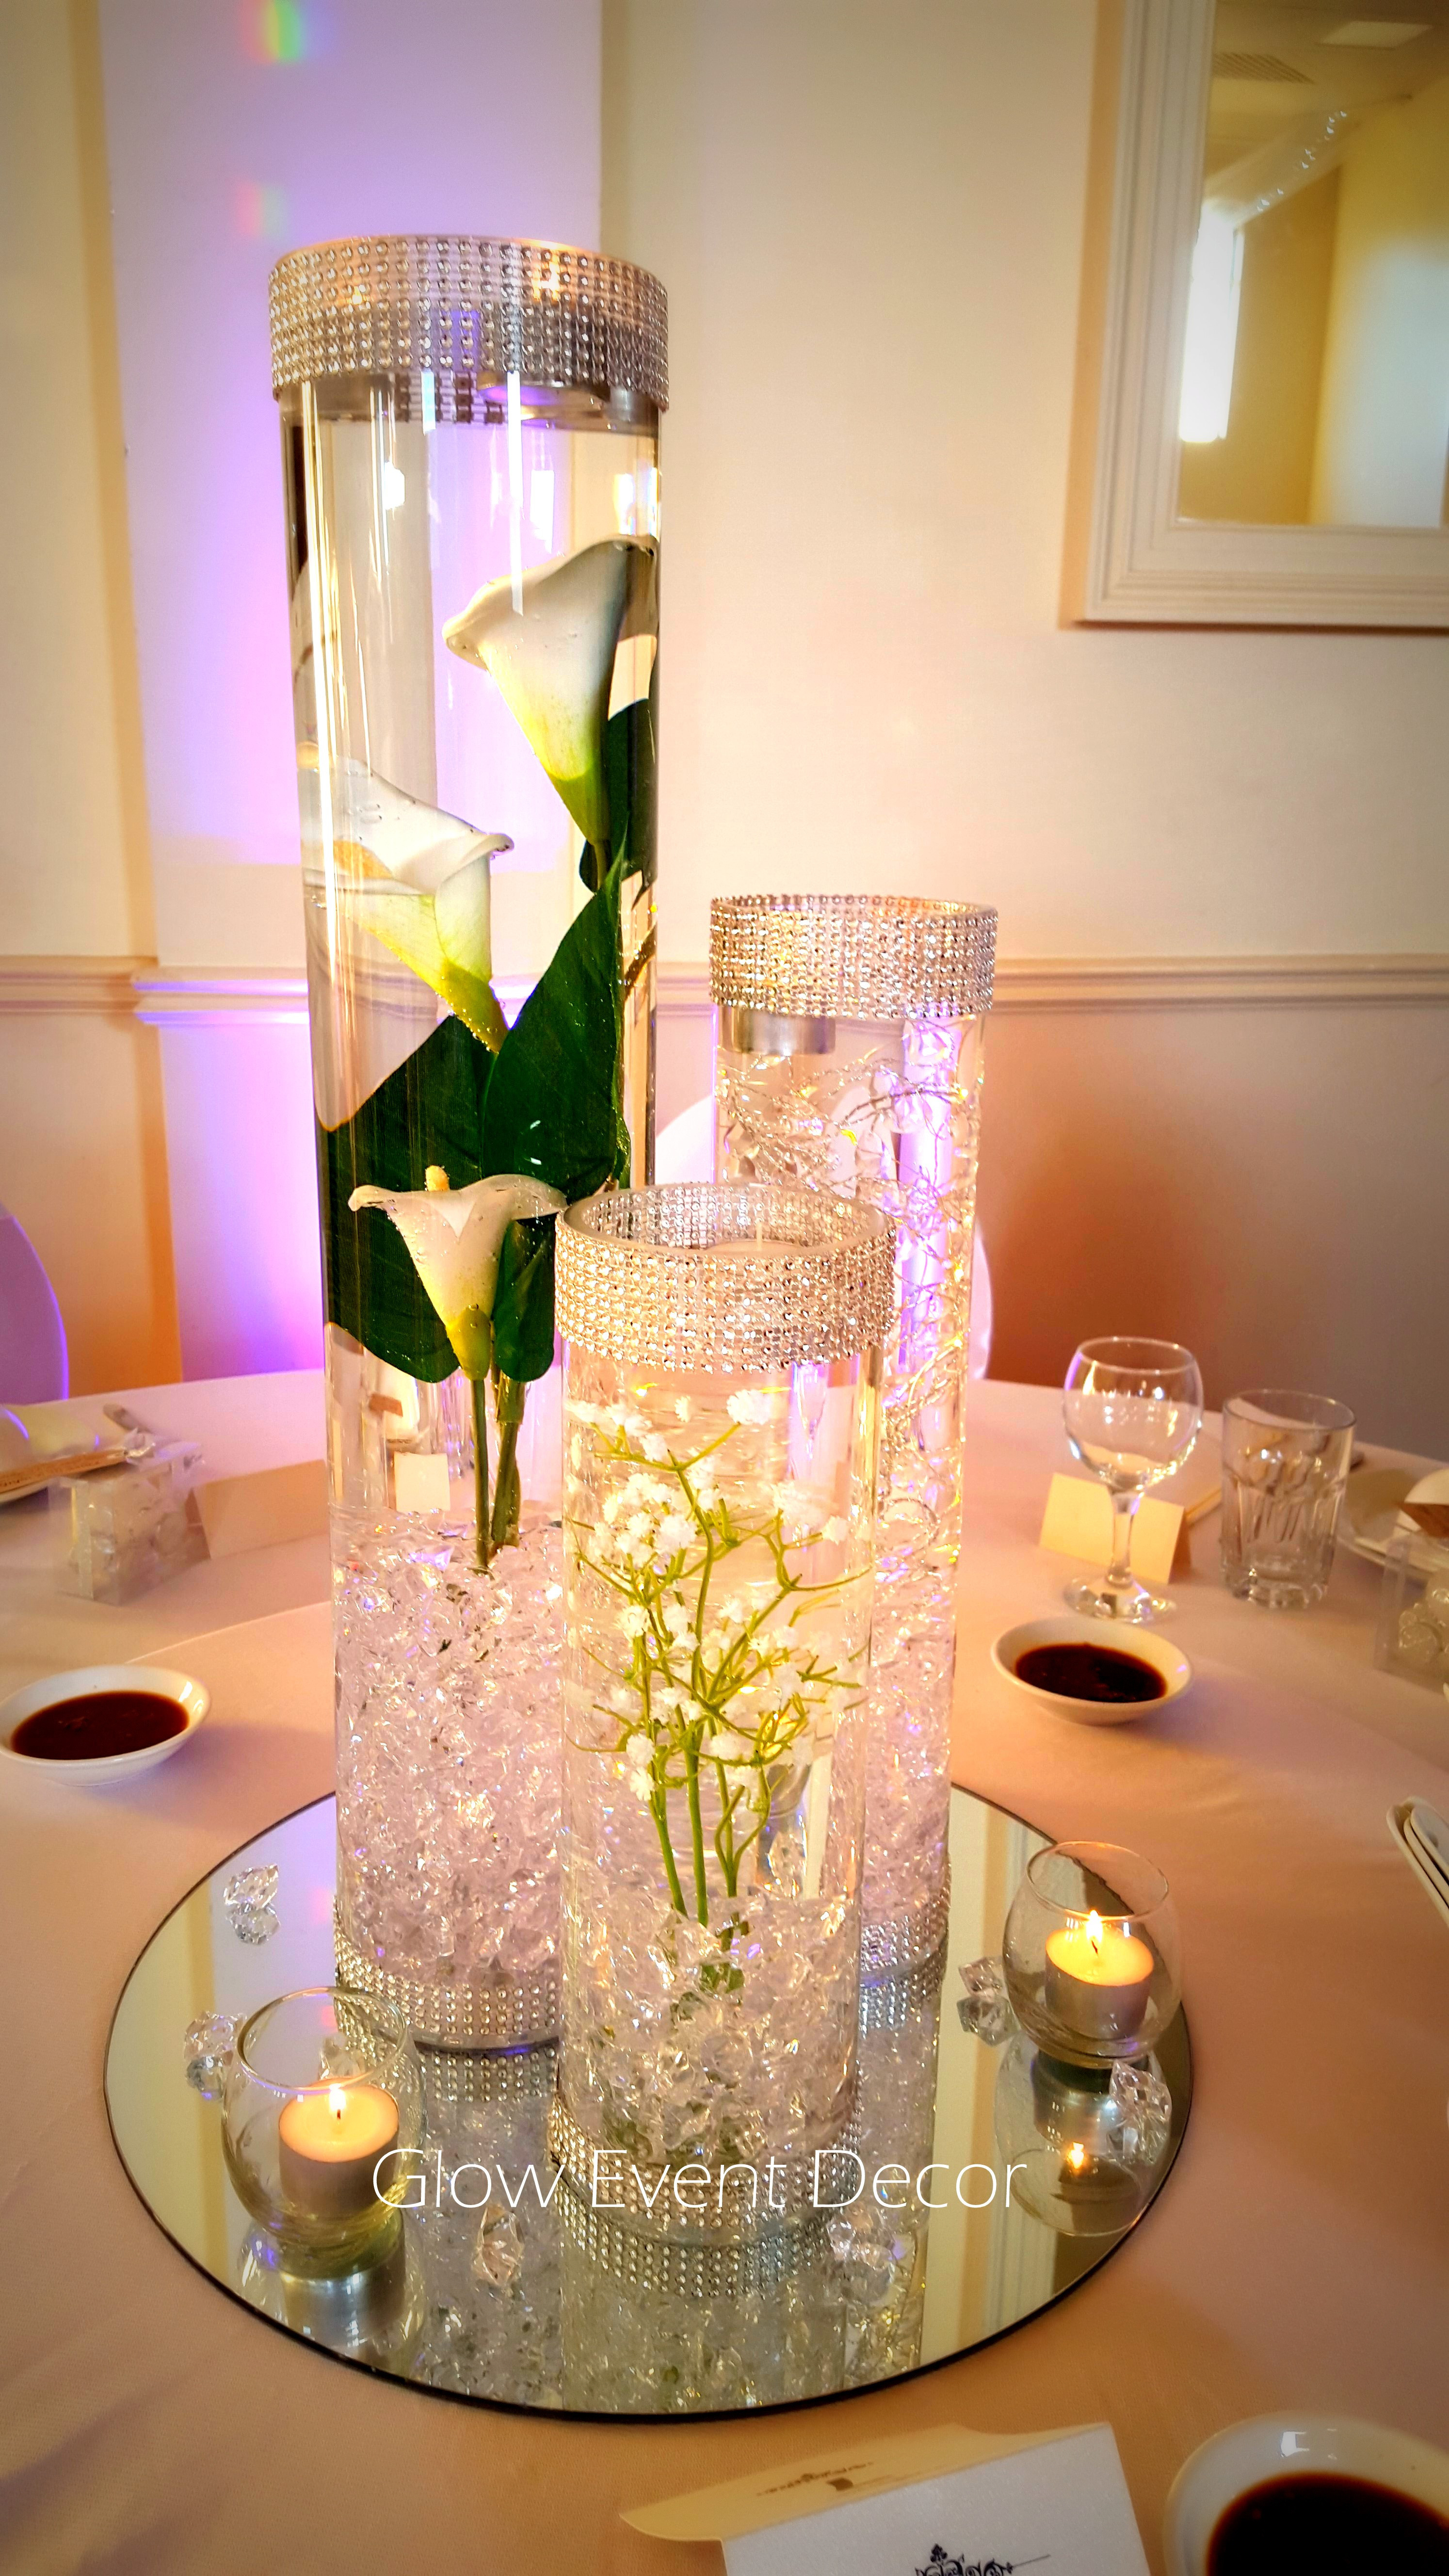 6 cylinder vases cheap of led orchid cylinder vase glow event decor throughout cylinder vase trio submerged lillies gyp sophlia bablies breath crystal garland for bridal